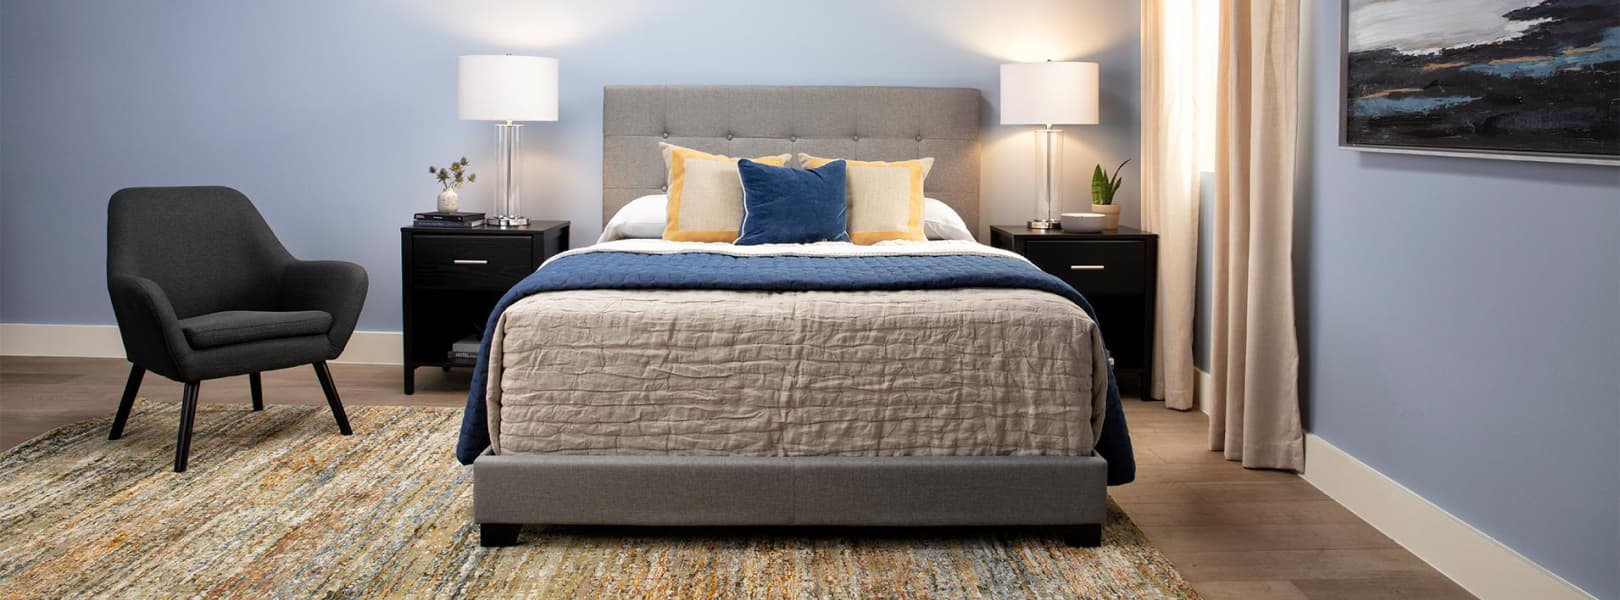 how to coordinate pillows and throws for a king size bed